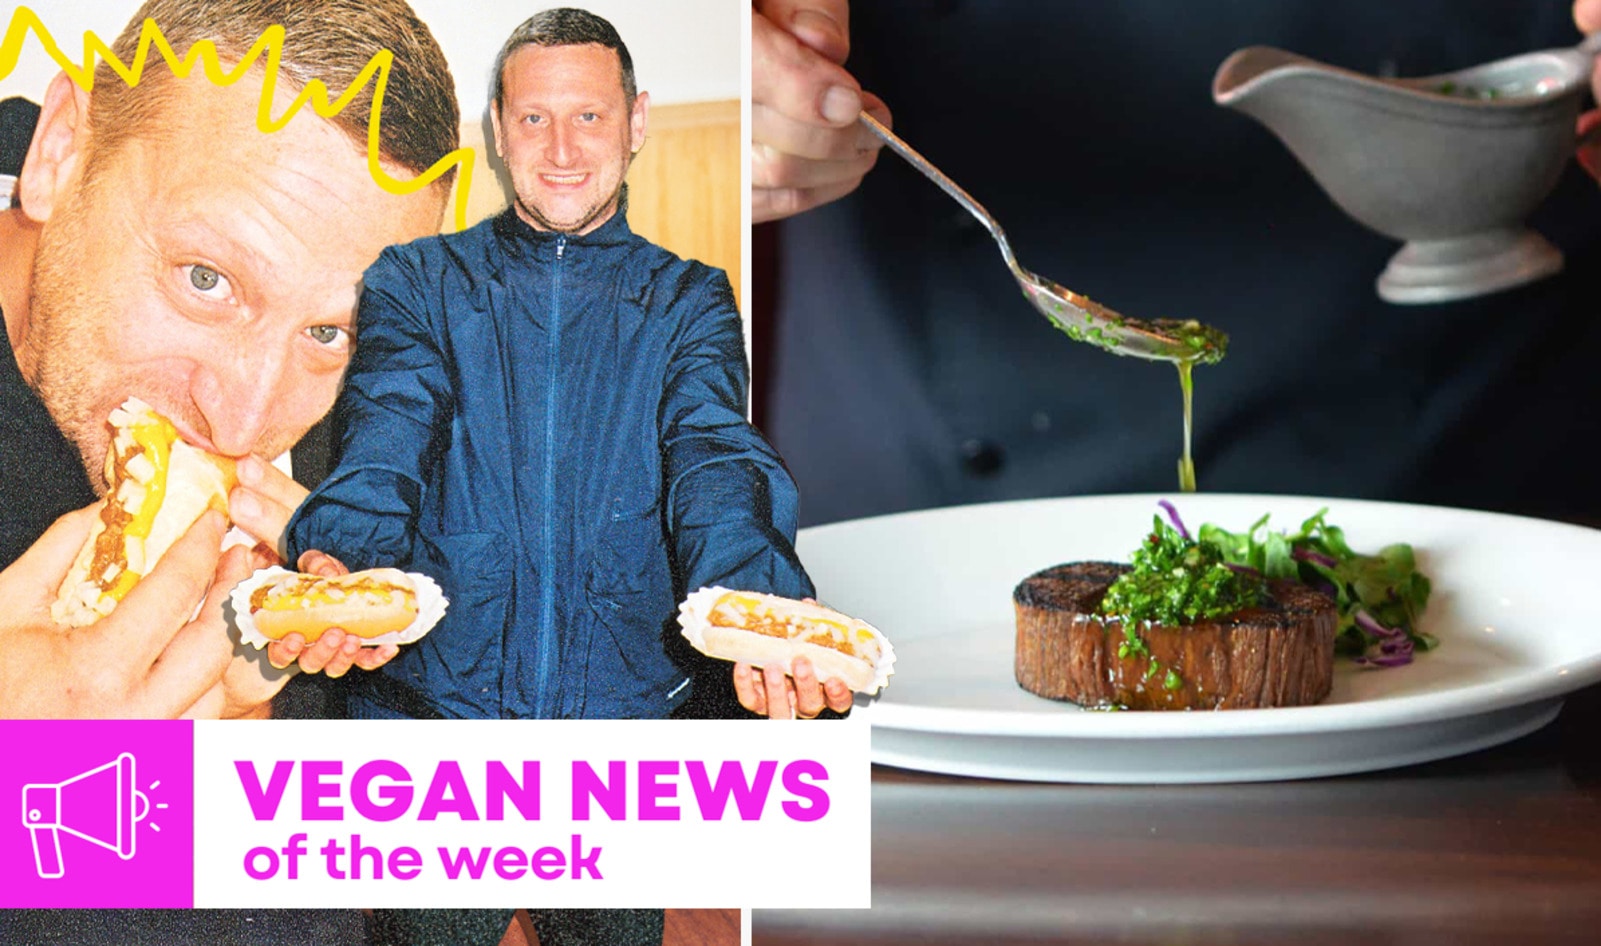 Vegan Restaurant News of the Week: Tim Robinson's Coney Dog, Steaks Across Florida, and More